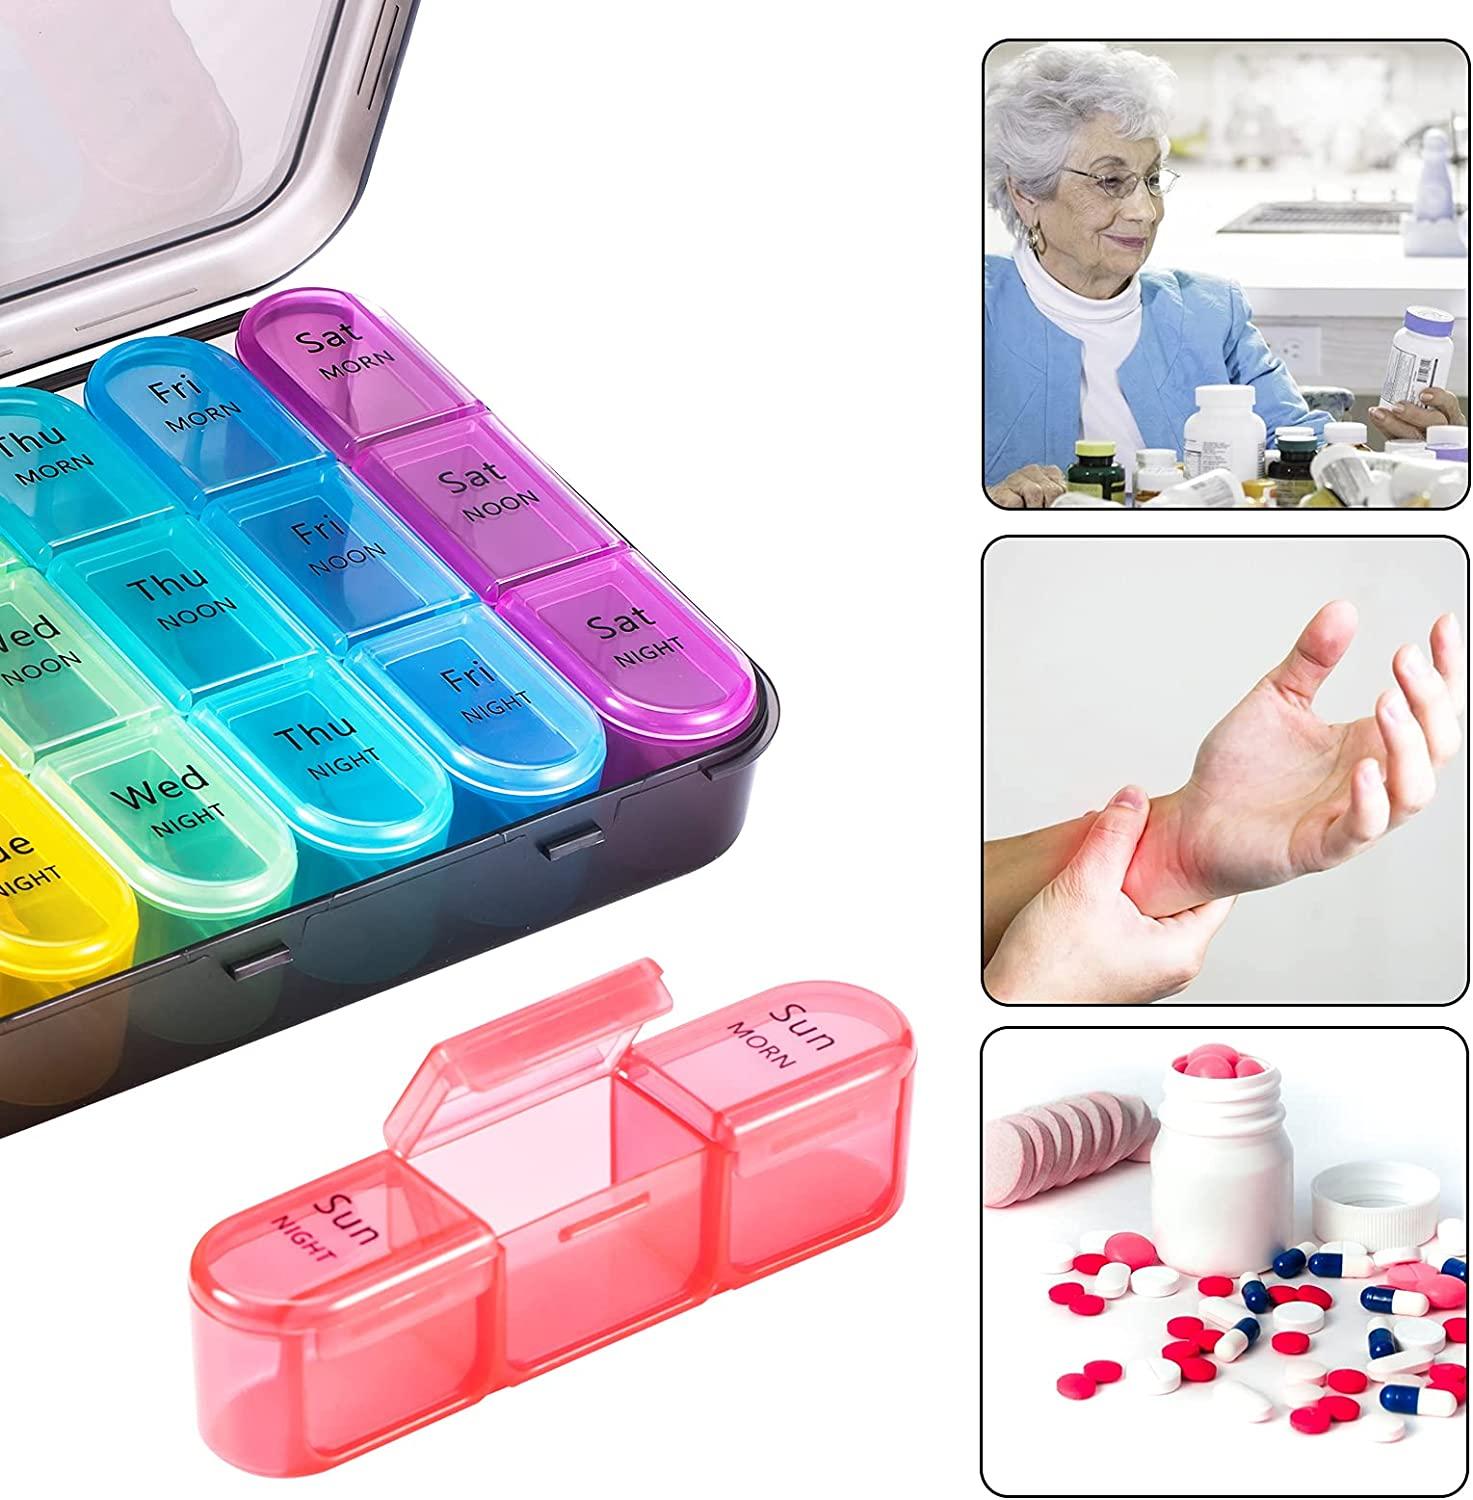 Hands DIY Pill Box Weekly 7 Days Pill Box Medication Box 28 Compartments  Pill Organizer Pill Dispenser Plastic Medicine Storage Dispenser 7-Day  Usage 7 Colors Pill Holder for Home Travel 